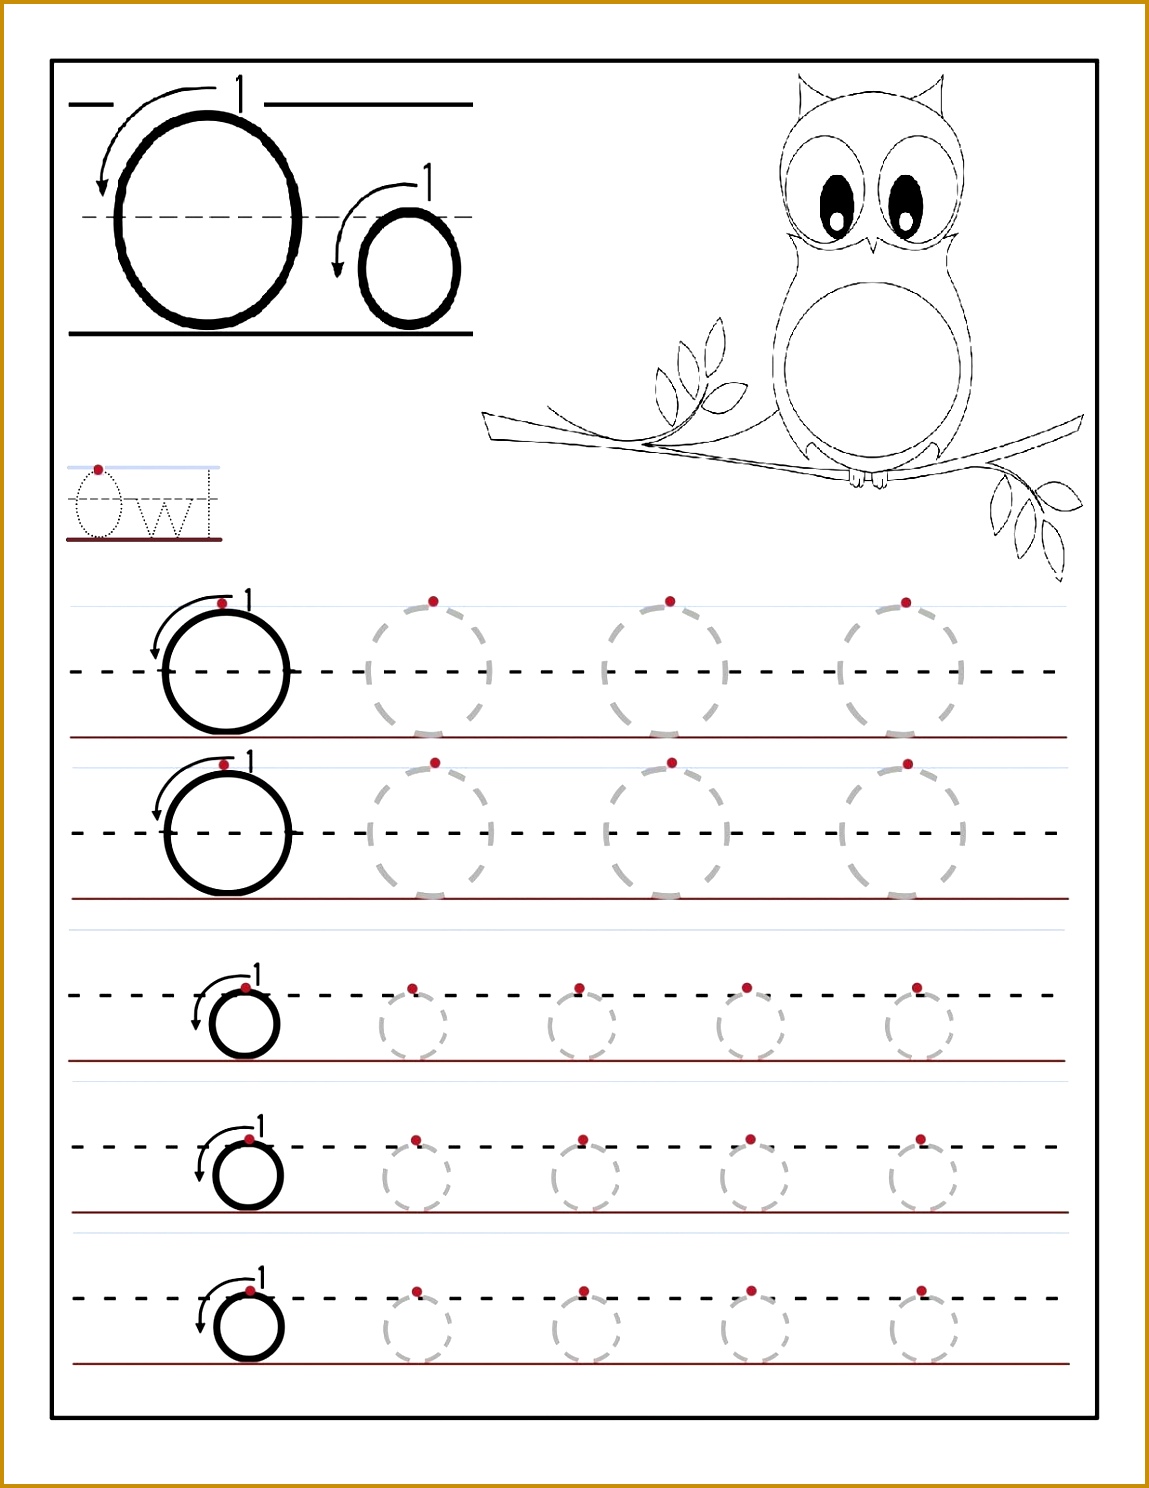 Free Printable letter O tracing worksheets for preschool Free connect the dots alphabet letters worksheets for kids Más 14881149